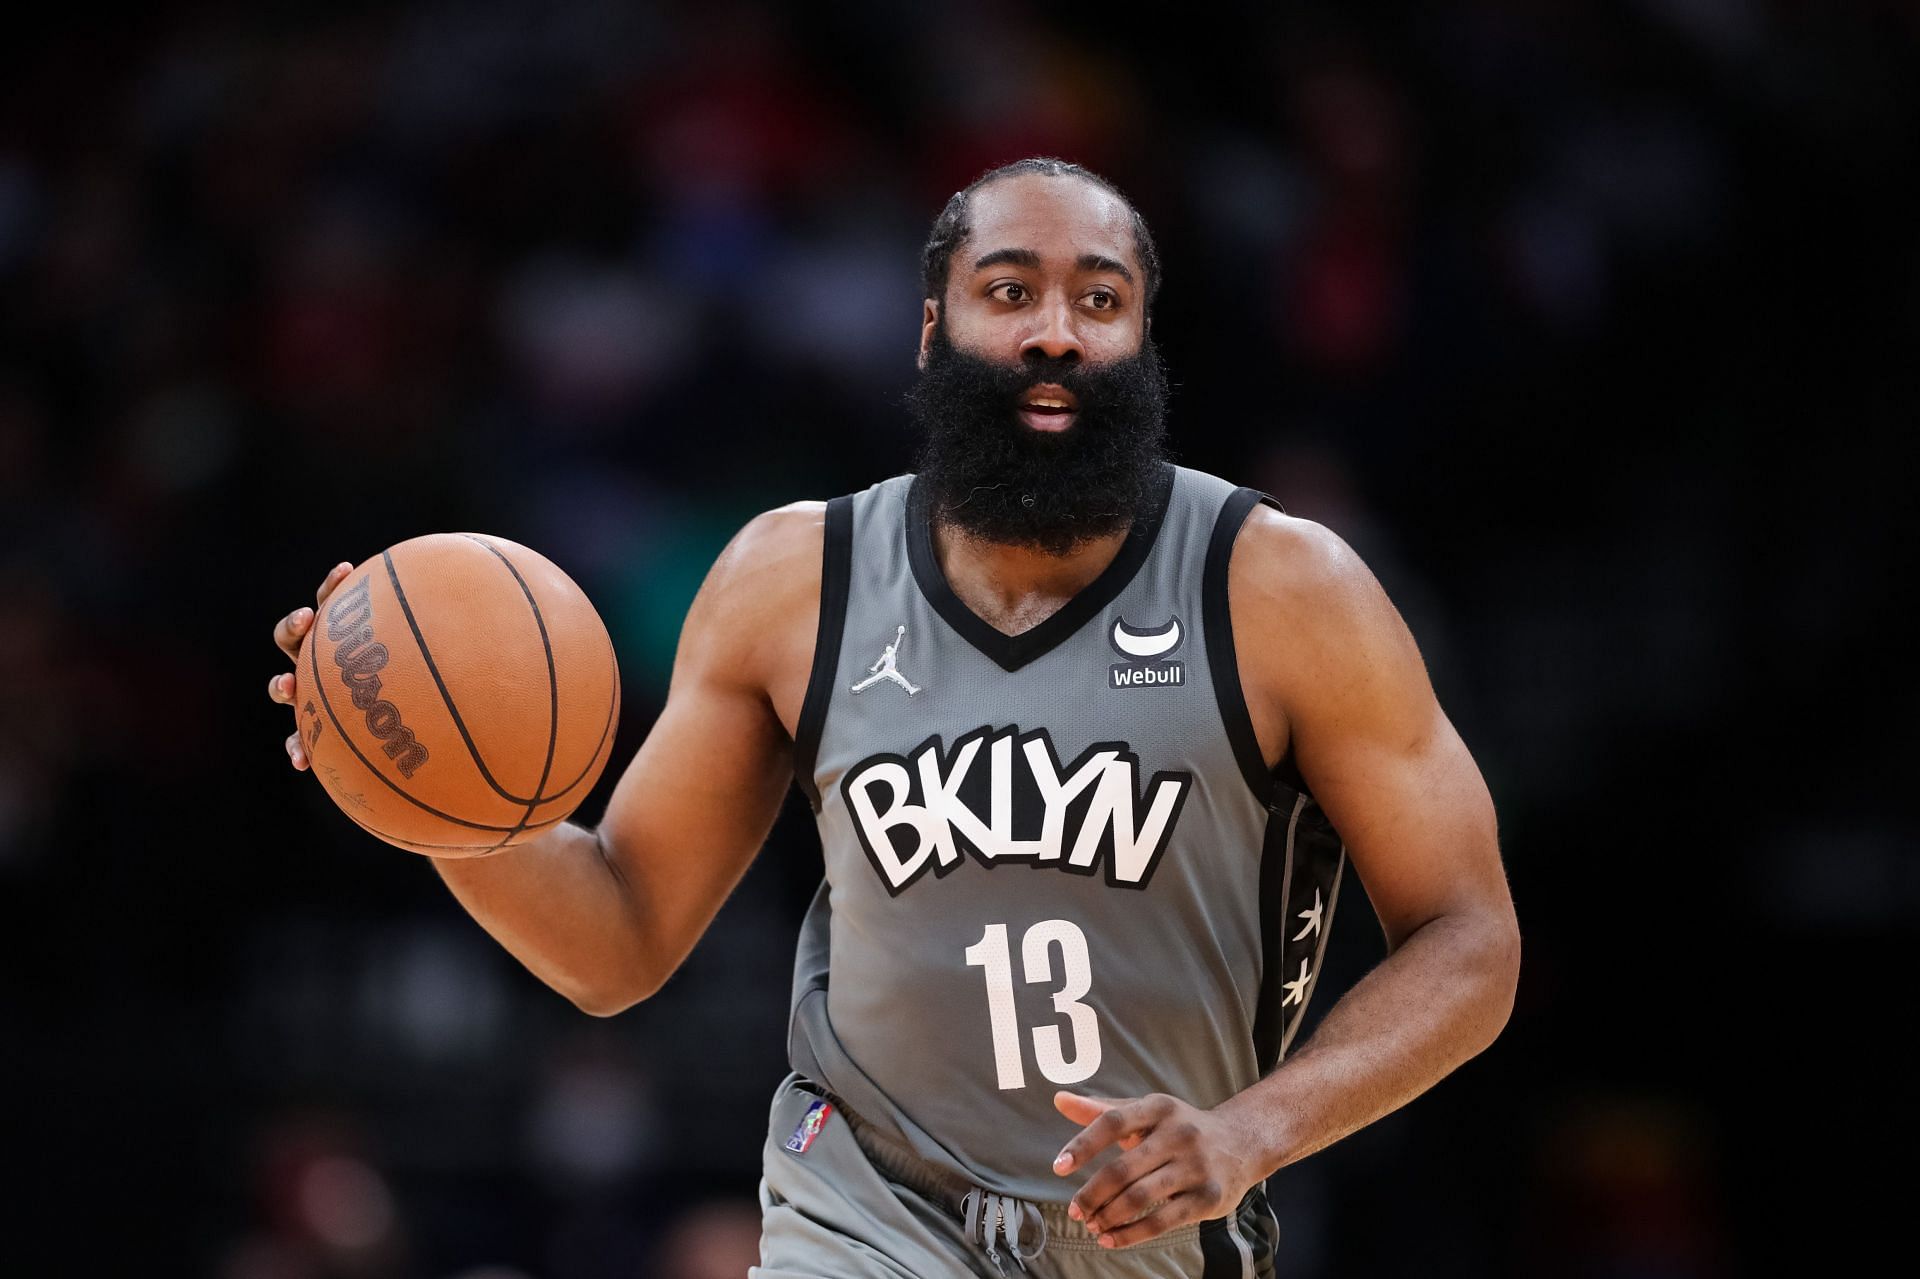 James Harden of the Brooklyn Nets controls the ball against the Houston Rockets on Dec. 8 in Texas.